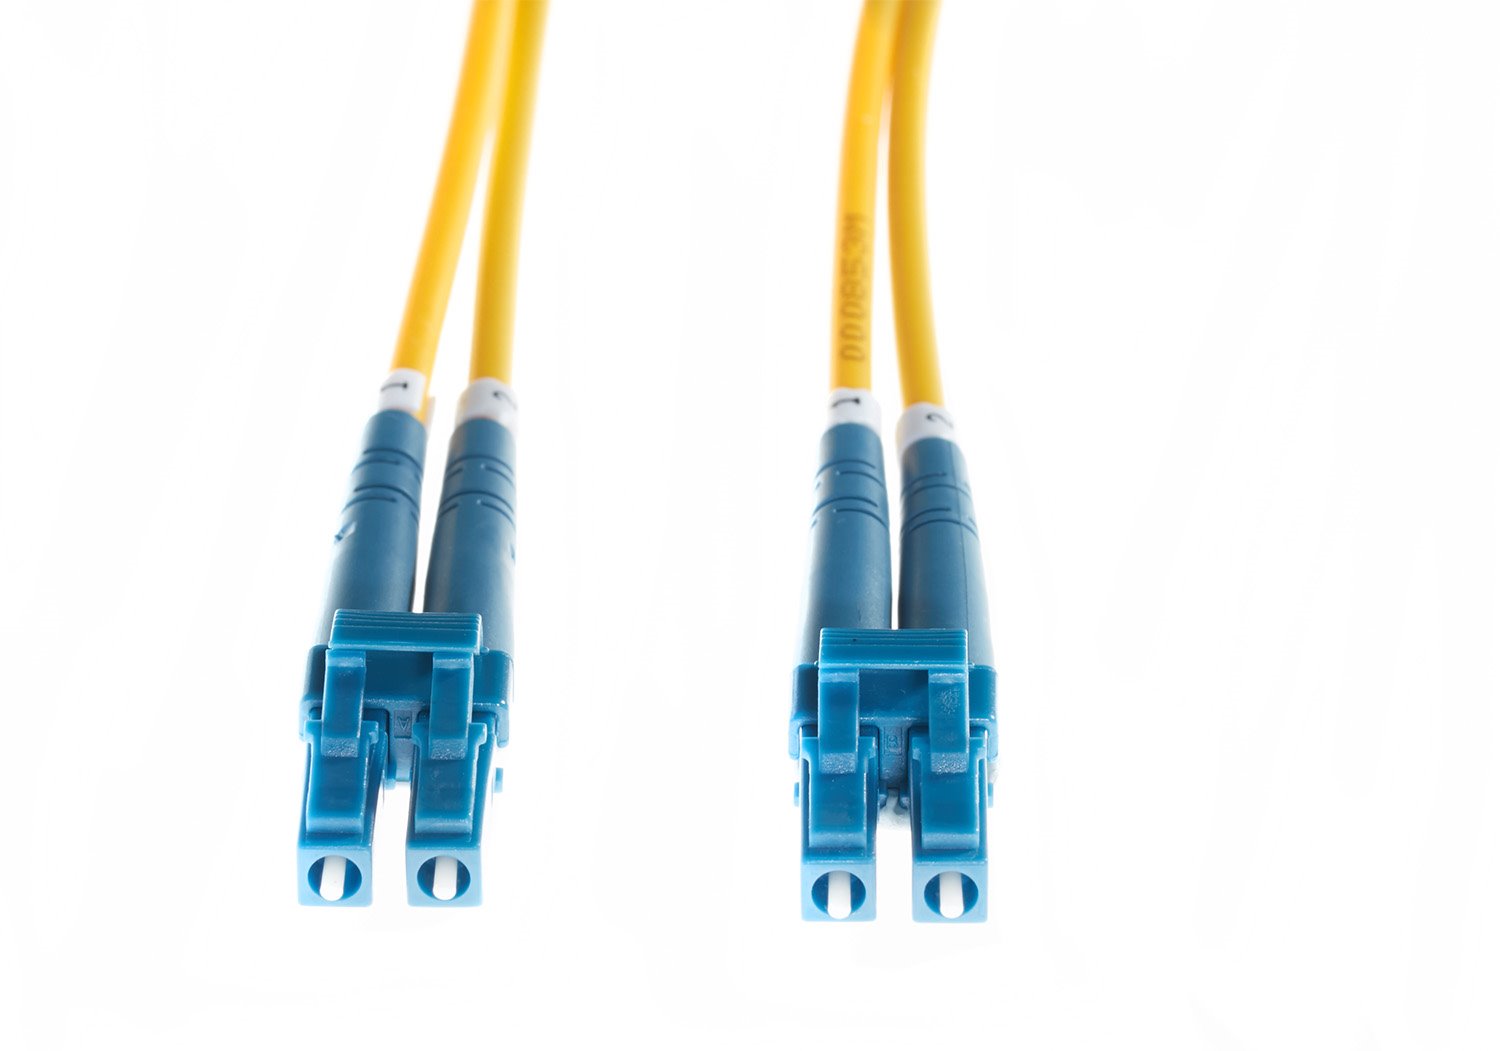 4Cabling 1M LC-LC Os1 / Os2 Singlemode Fibre Optic Cable: Yellow